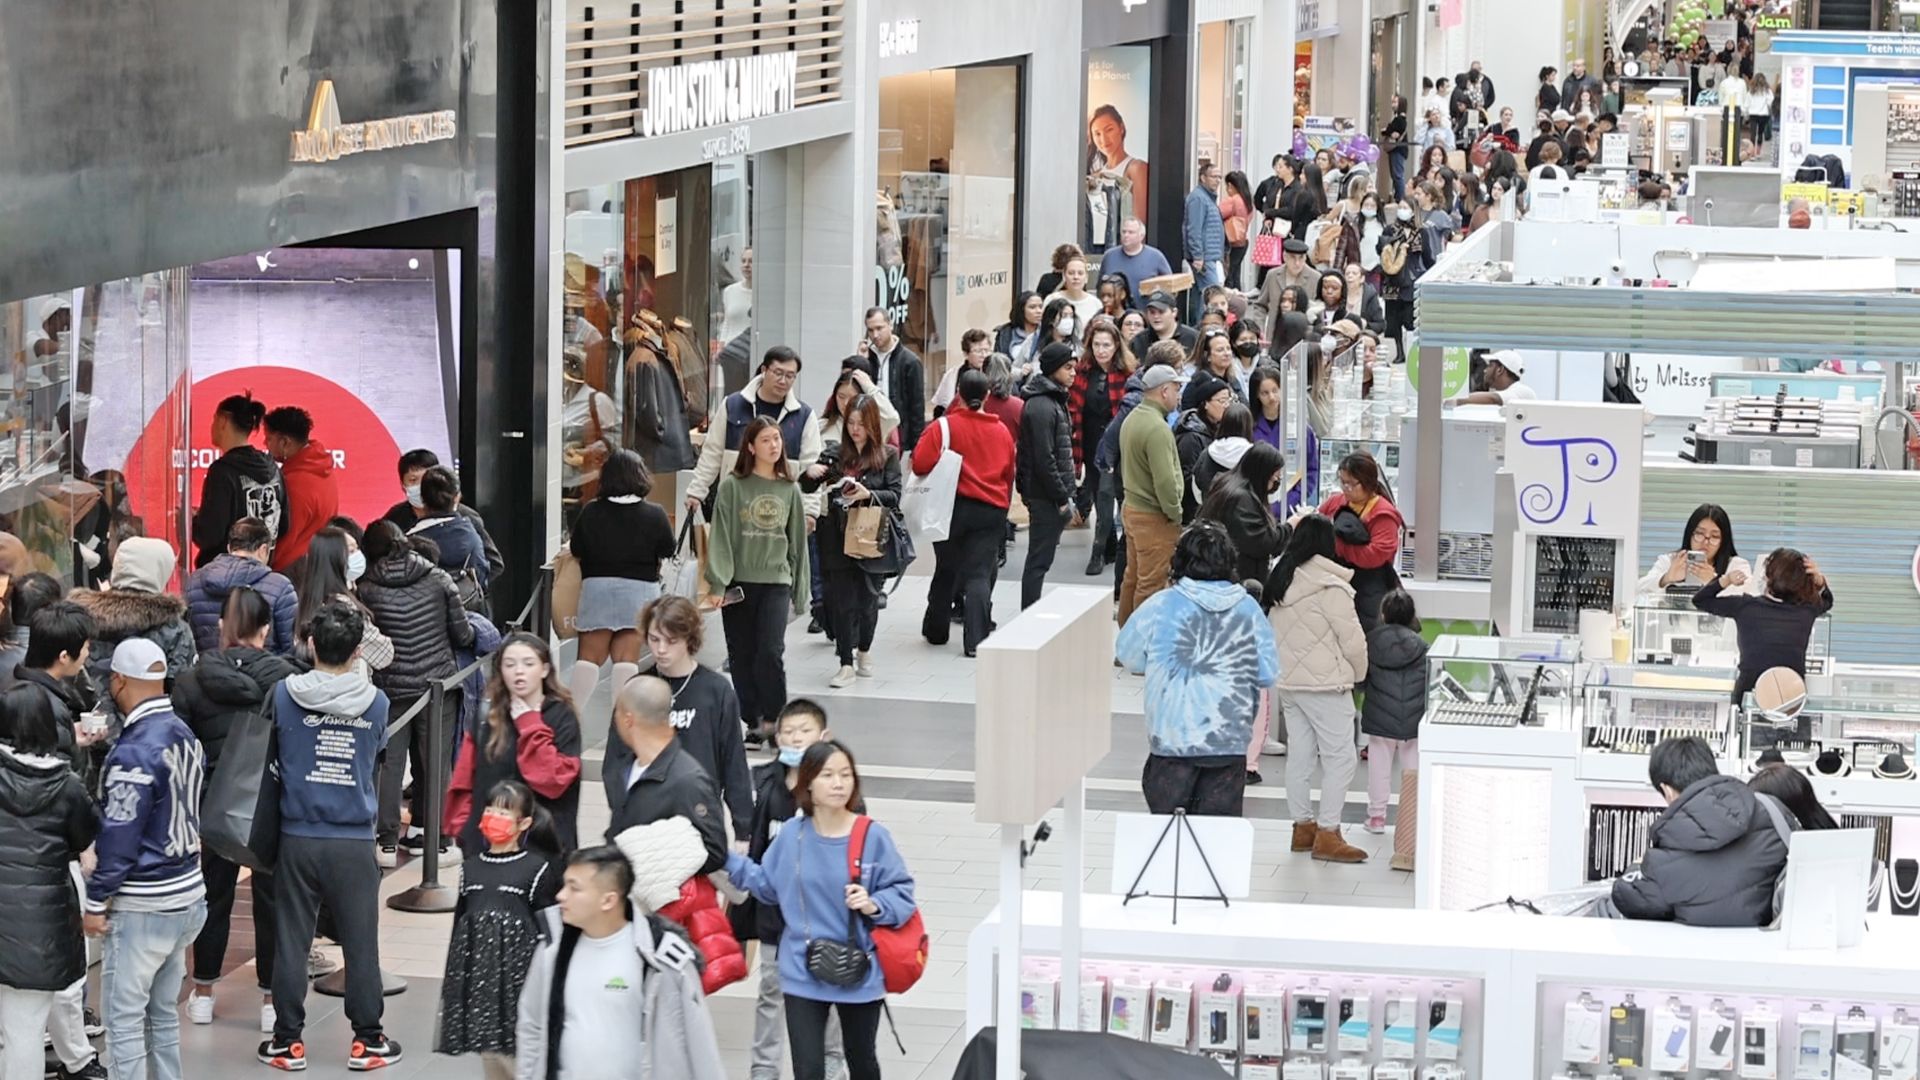 Garden City, N.Y.: Overview of shoppers filling the halls of the Roosevelt Field Mall for Black Friday shopping on November 25, 2022.